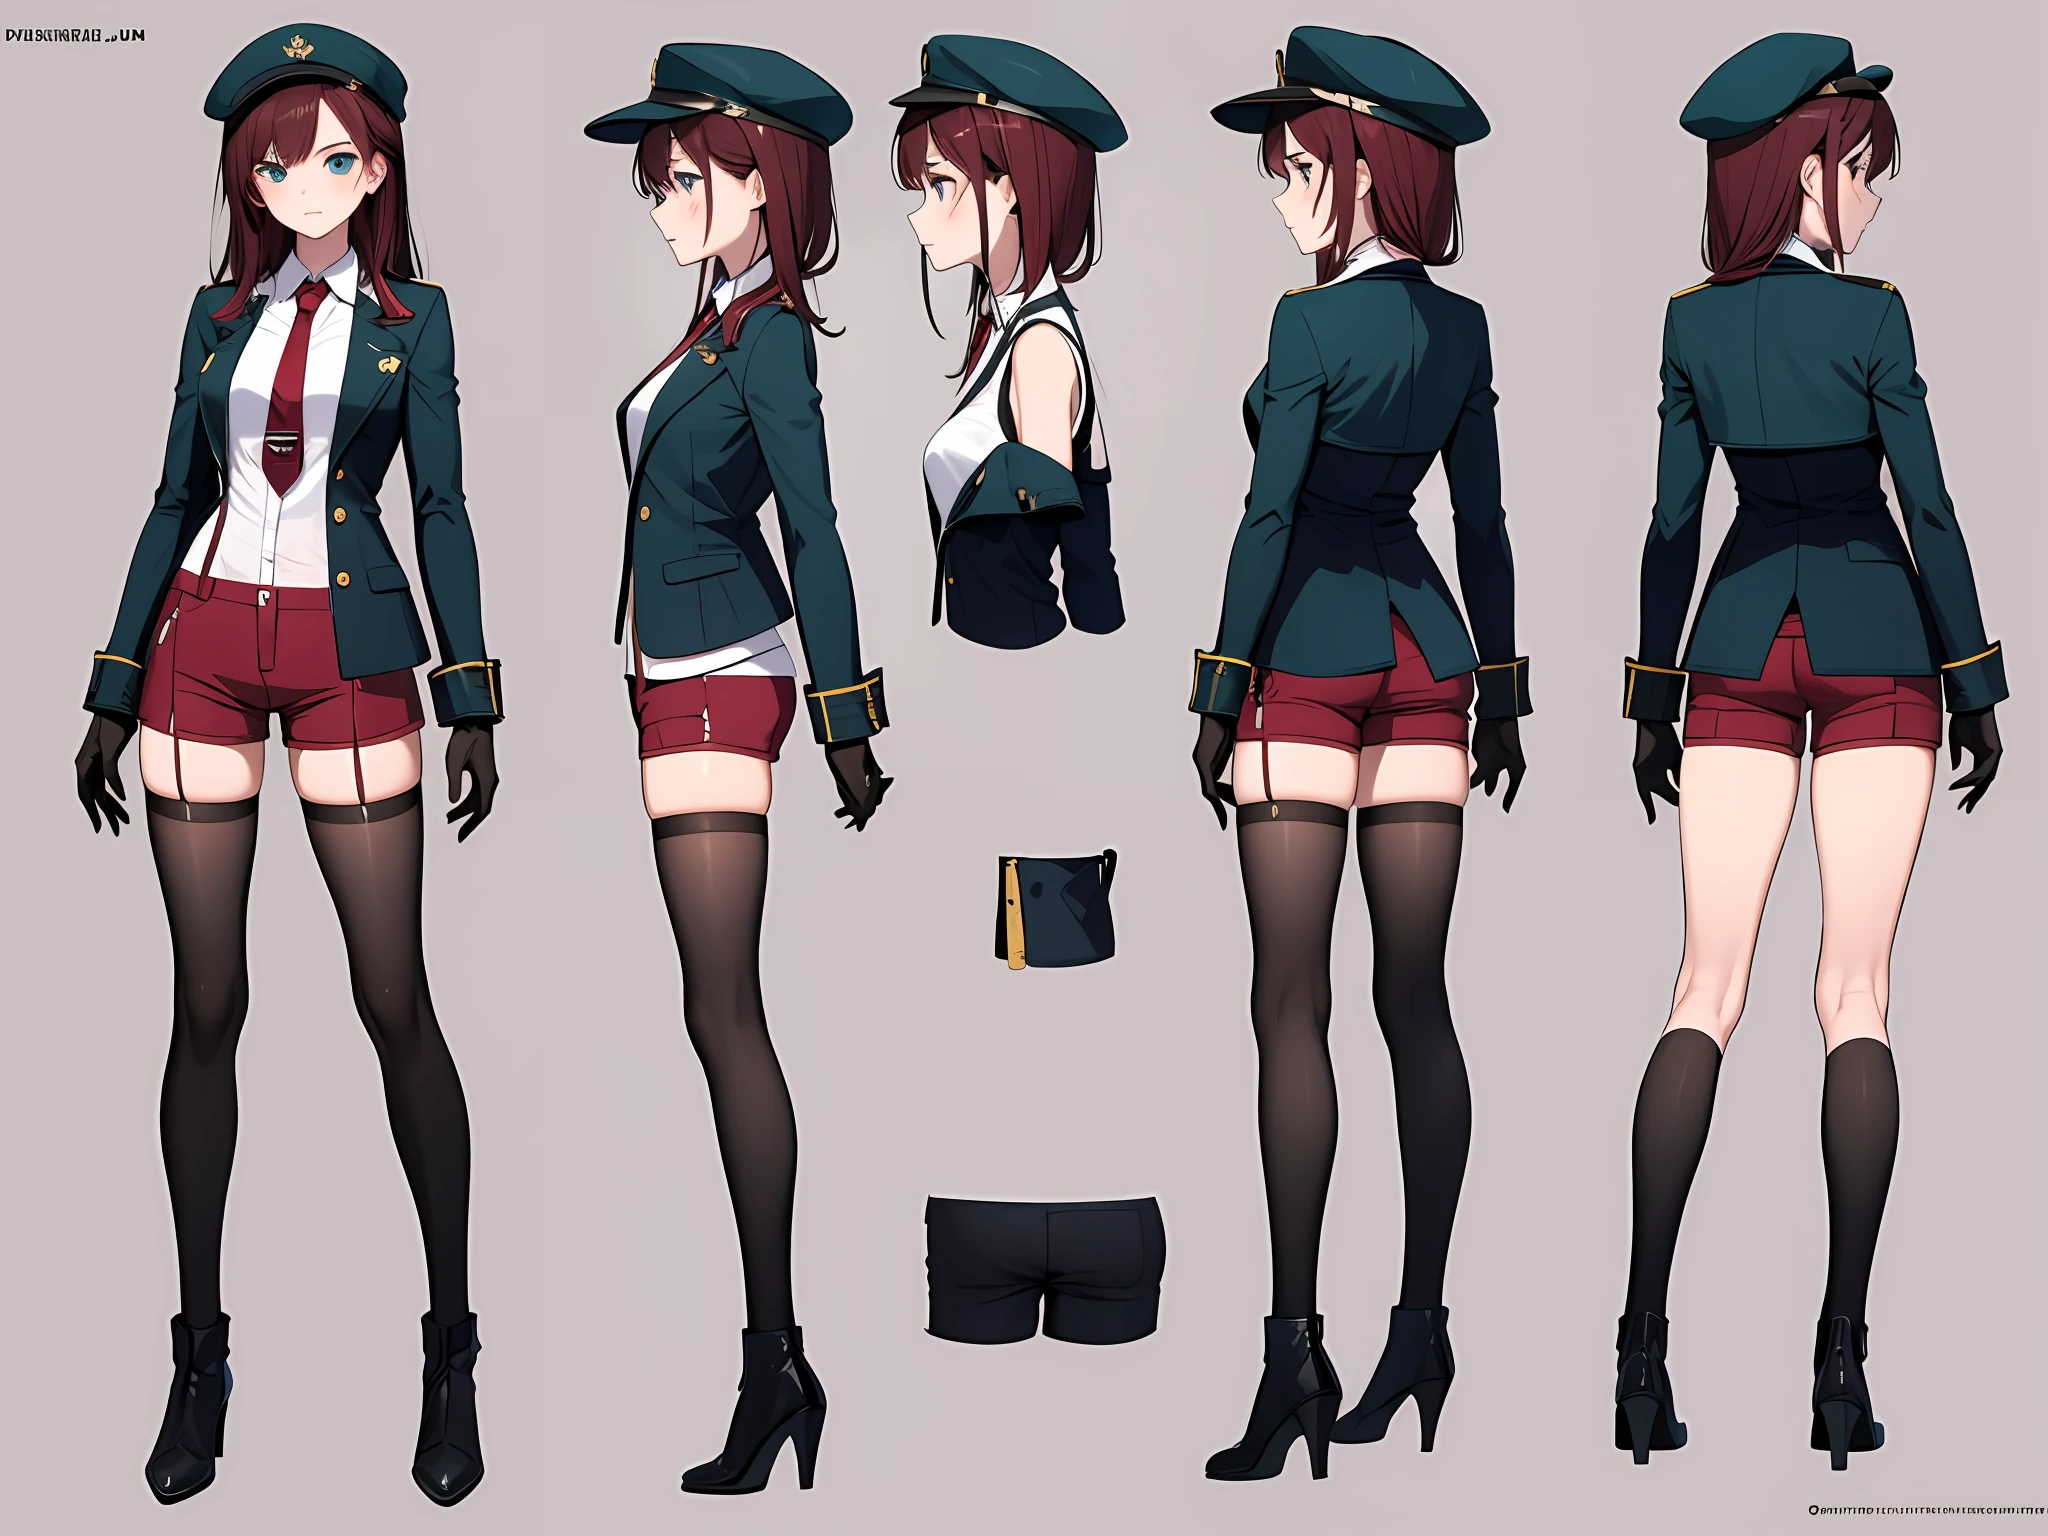 best quality, (masterpiece:1.2), illustration, absurdres,
(1girl, solo), (beautiful detailed girl), full body shot, (turnaround:1.4), multiple views, front view, side view, back view,
Noel Seeker, red hair, blue eyes, small breasts,
green_headwear, green_jacket, grey_undershirt, red_necktie, (red_shorts), black_thighhighs, brown_boots, brown_gloves,